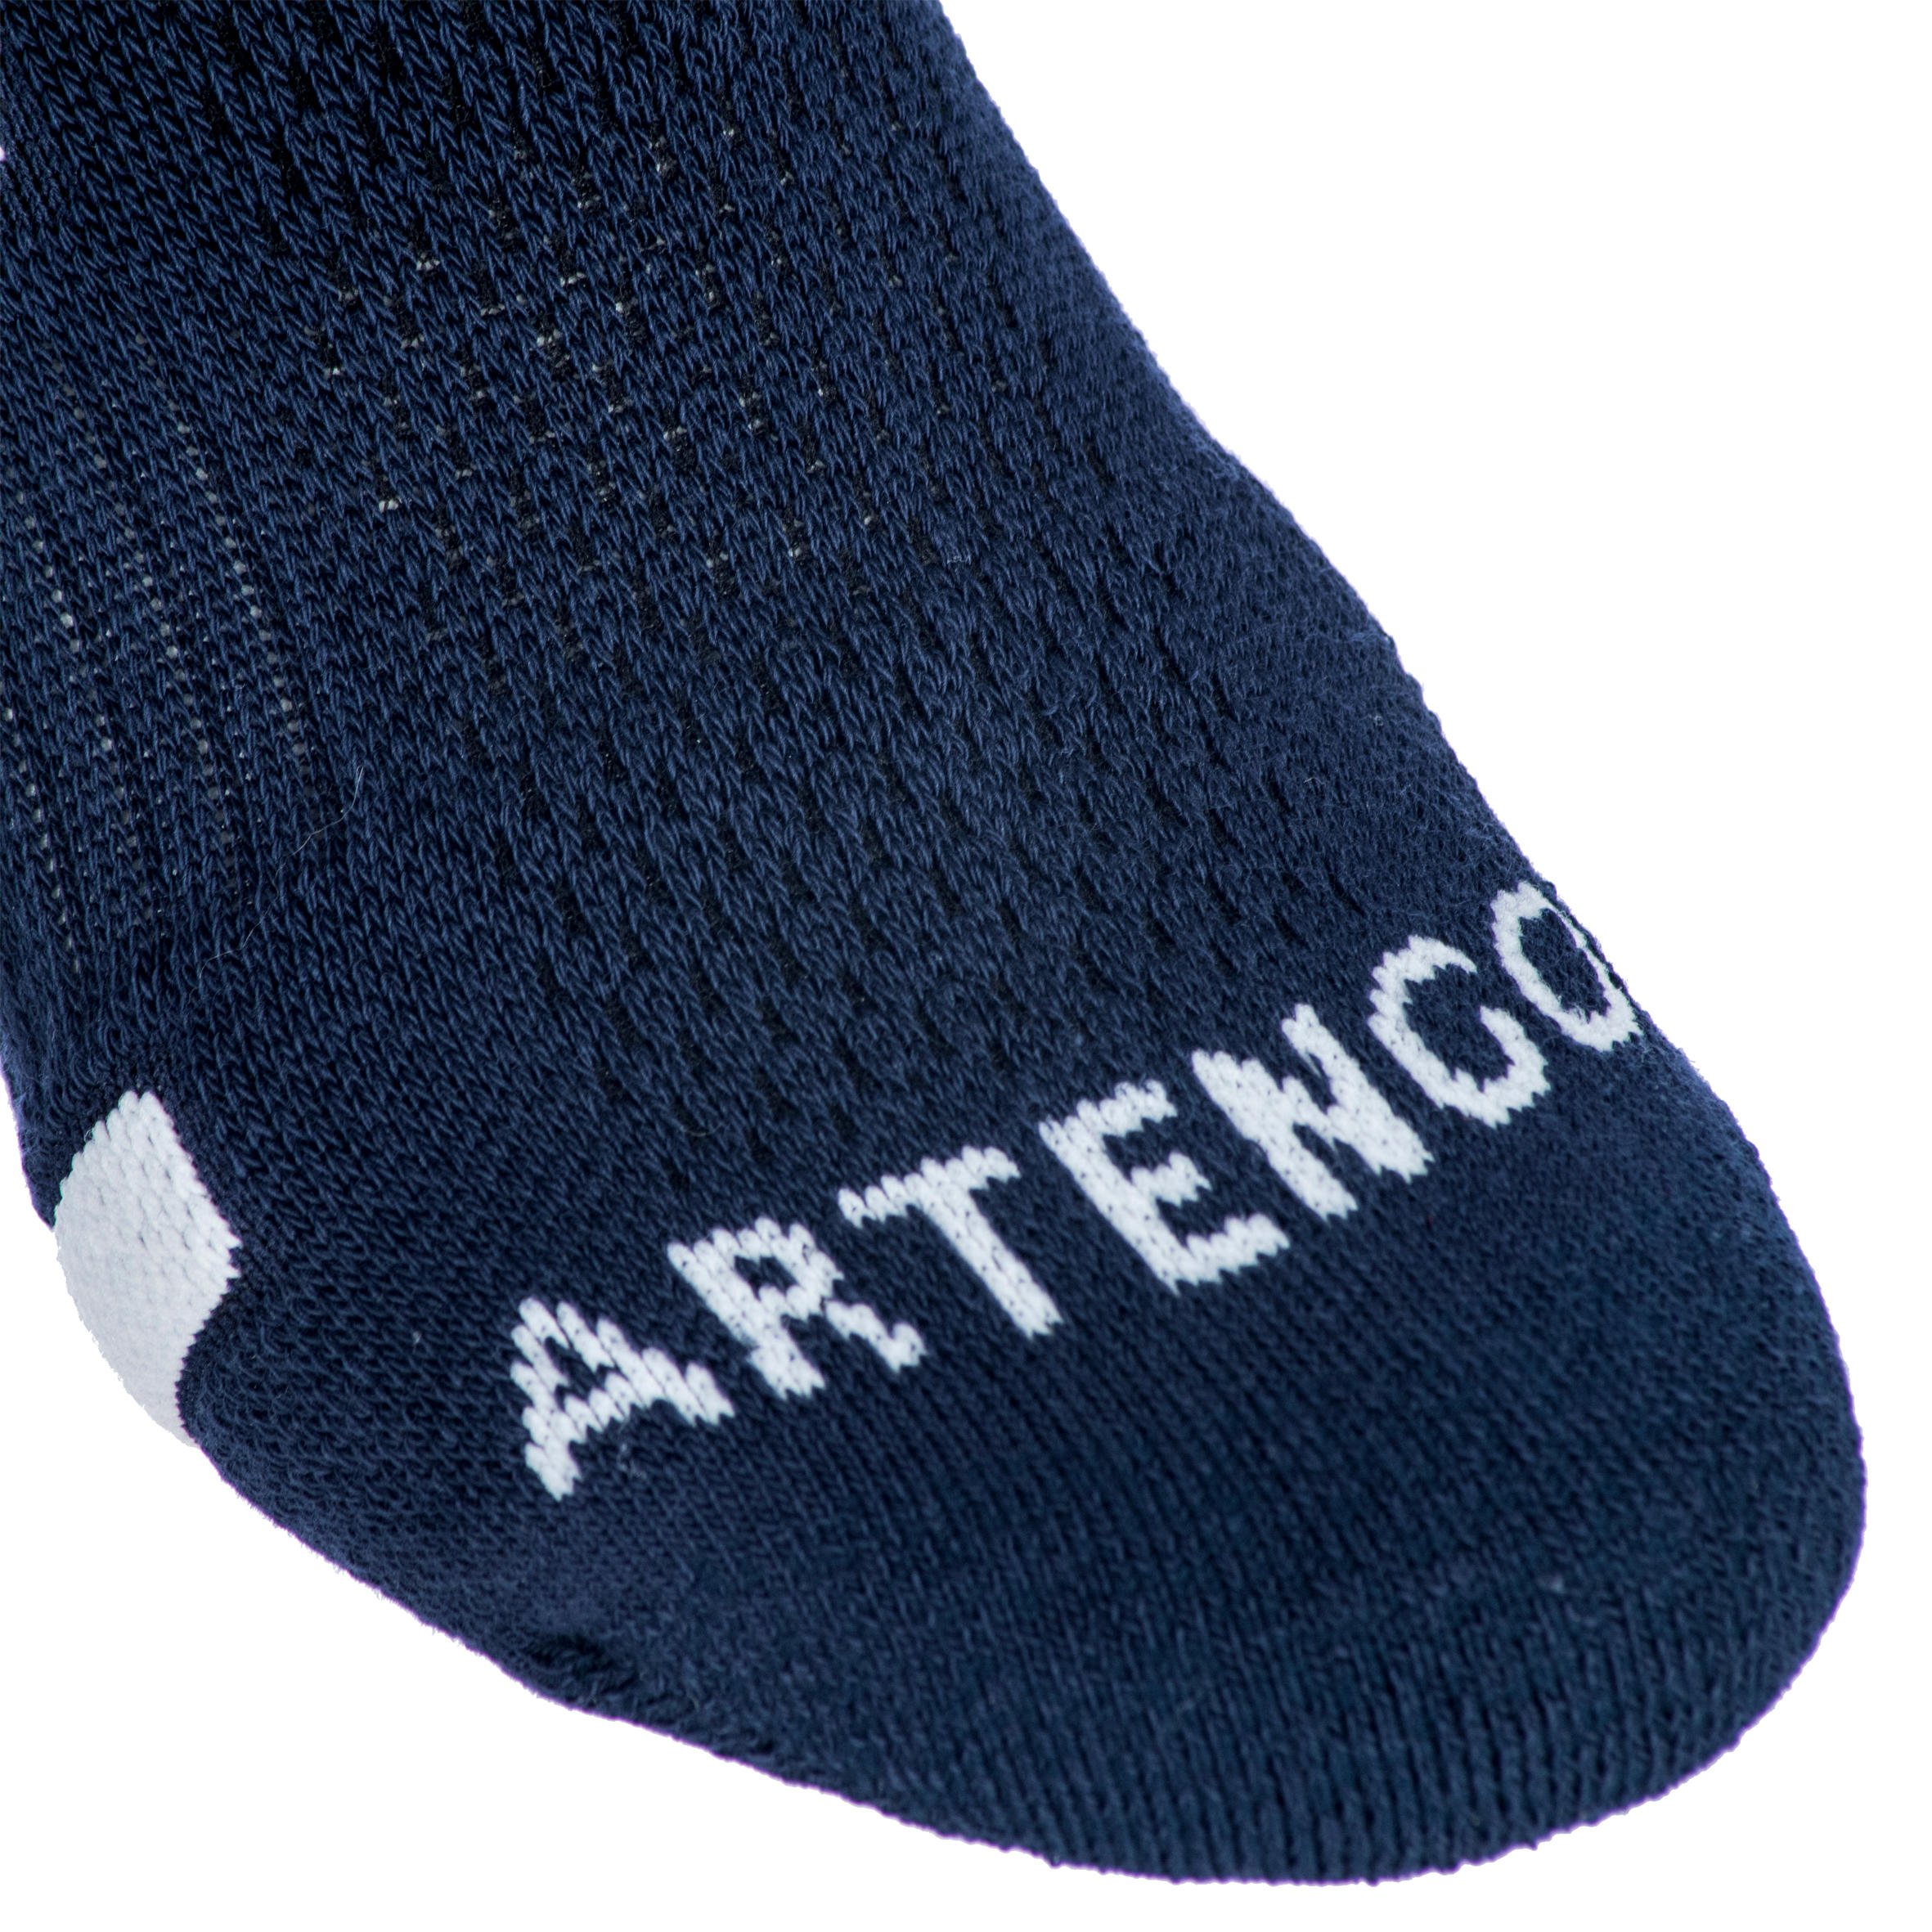 Low Sports Socks RS 560 Tri-Pack - Navy/White 8/12